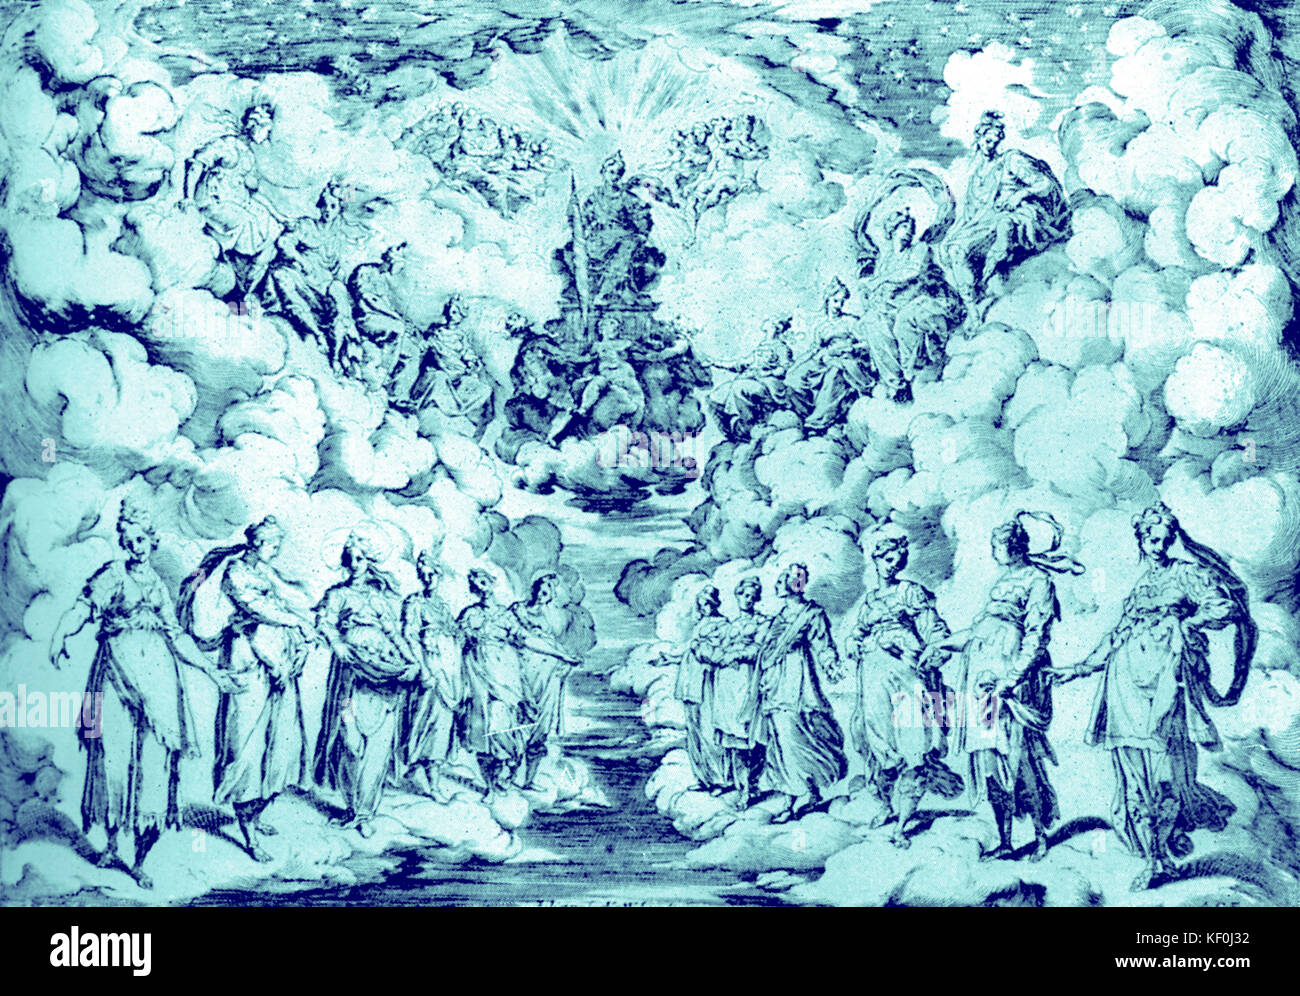 Florentine Intermedi of 1589 - L'armonia della stere. Setting designed by Bernardo Buontalenti for the first intermedio from the 1589 Medici wedding:  Harmony descends to earth (intermedi attempted to recreate what was believed to be the ancient world's integration of music, drama and staging). Tinted version. Stock Photo